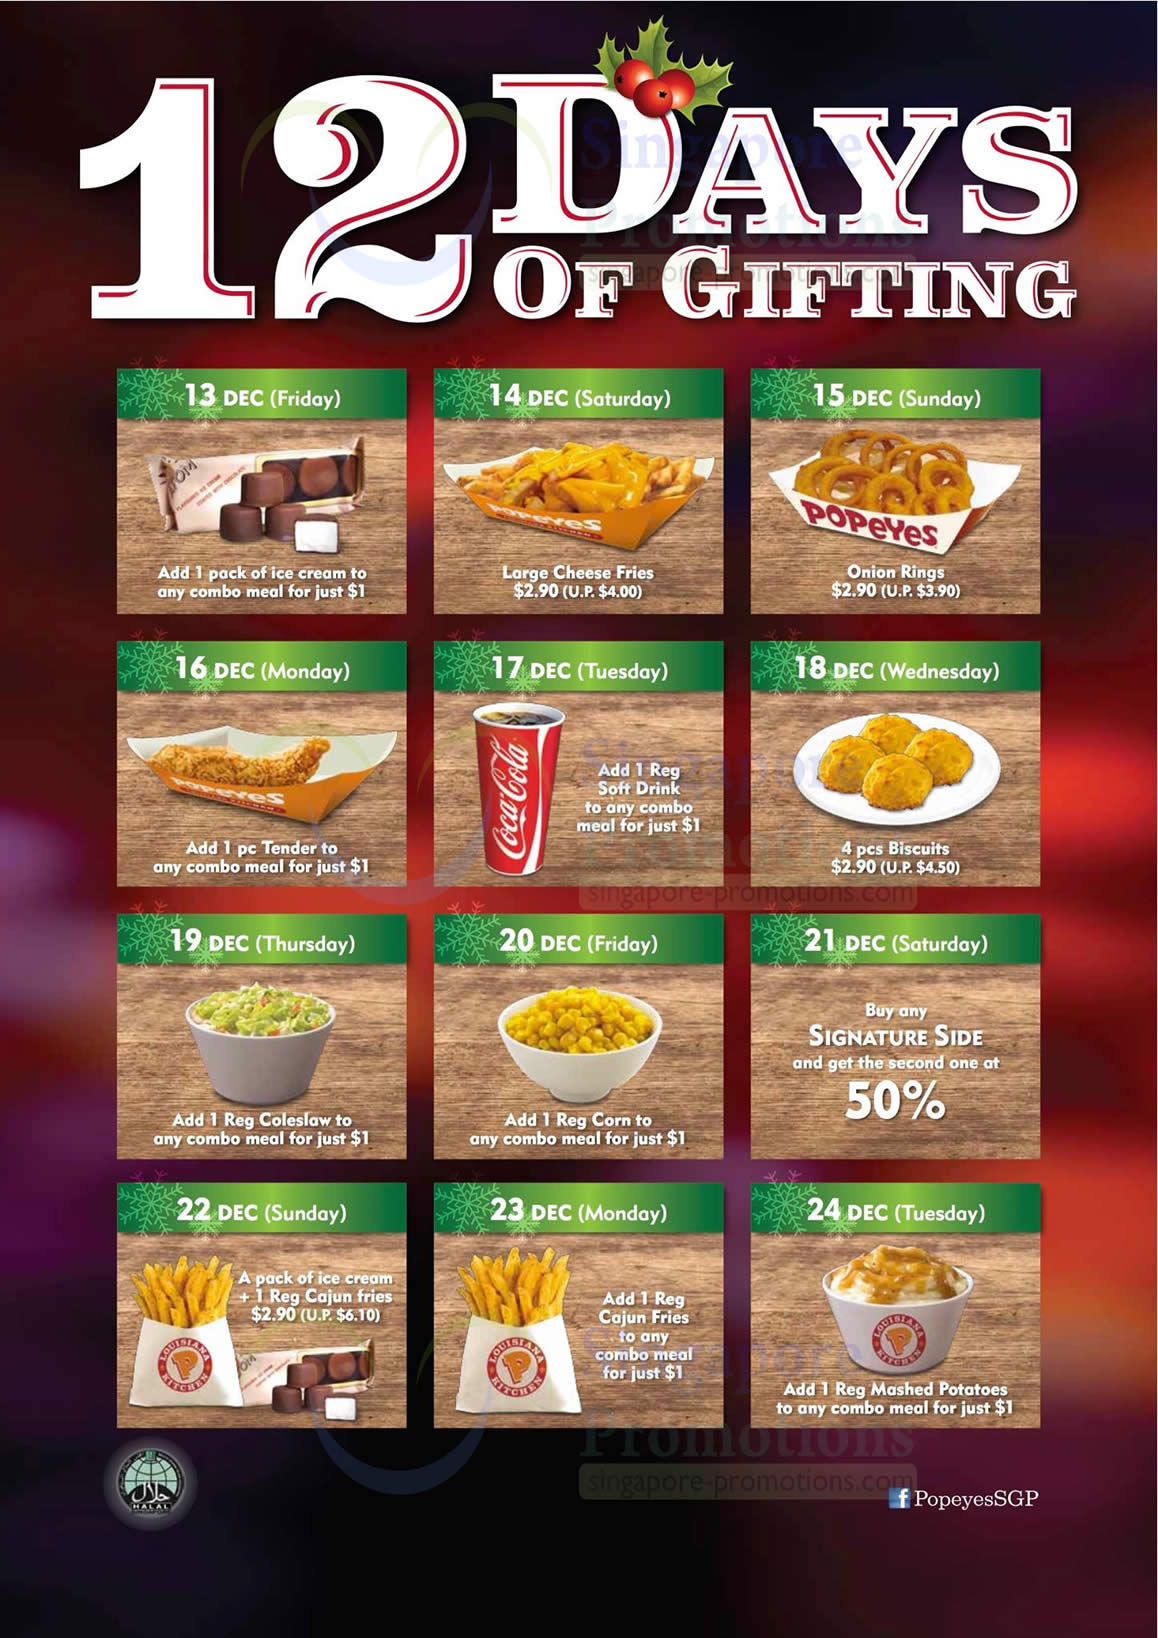 Popeyes 13 Dec 2013 » Popeyes 12 Days of Gifting Daily Deals 13 – 24